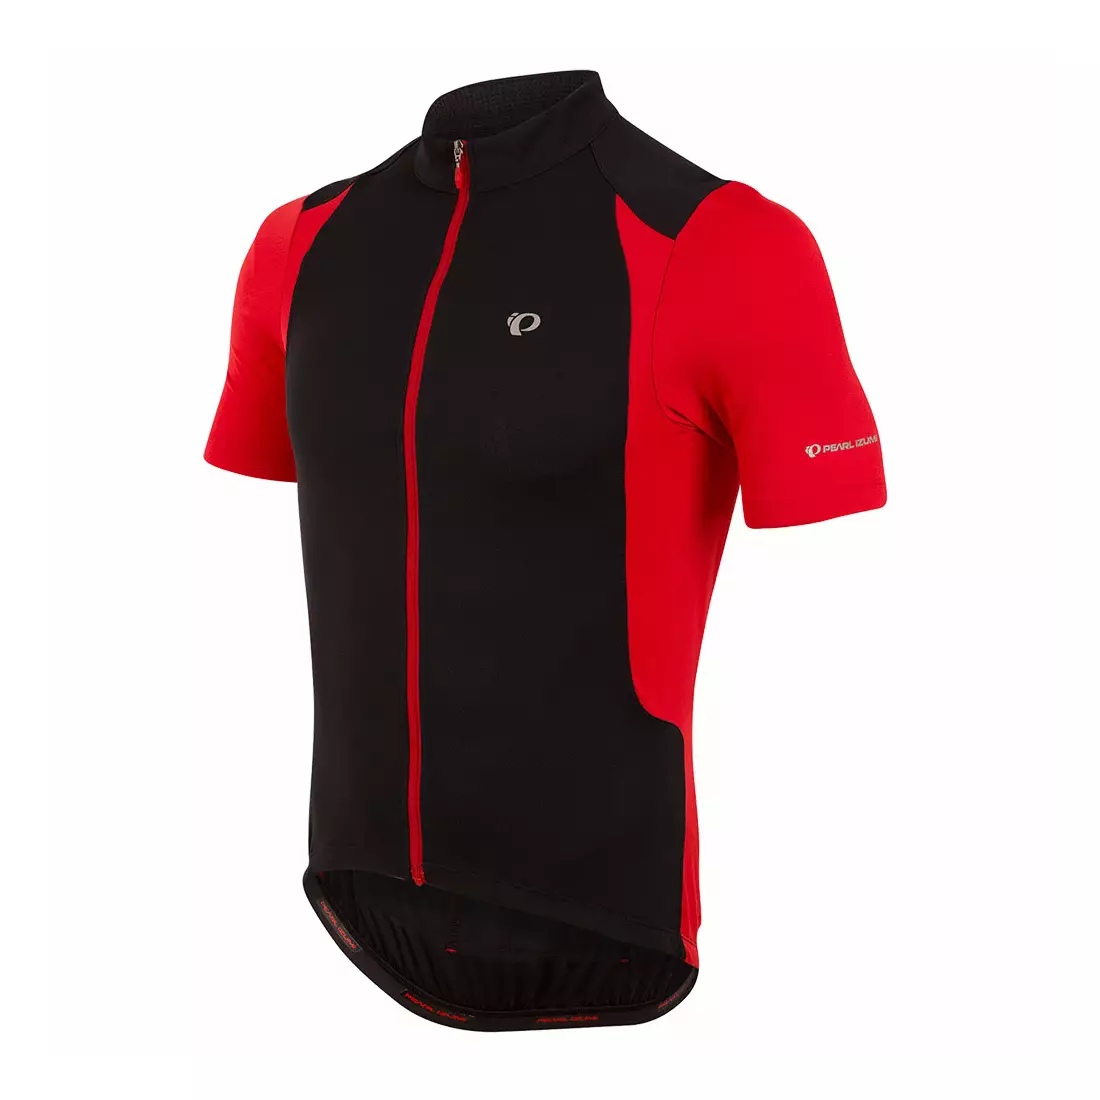 PEARL IZUMI SELECT cycling jersey 11121608-2FK black and red